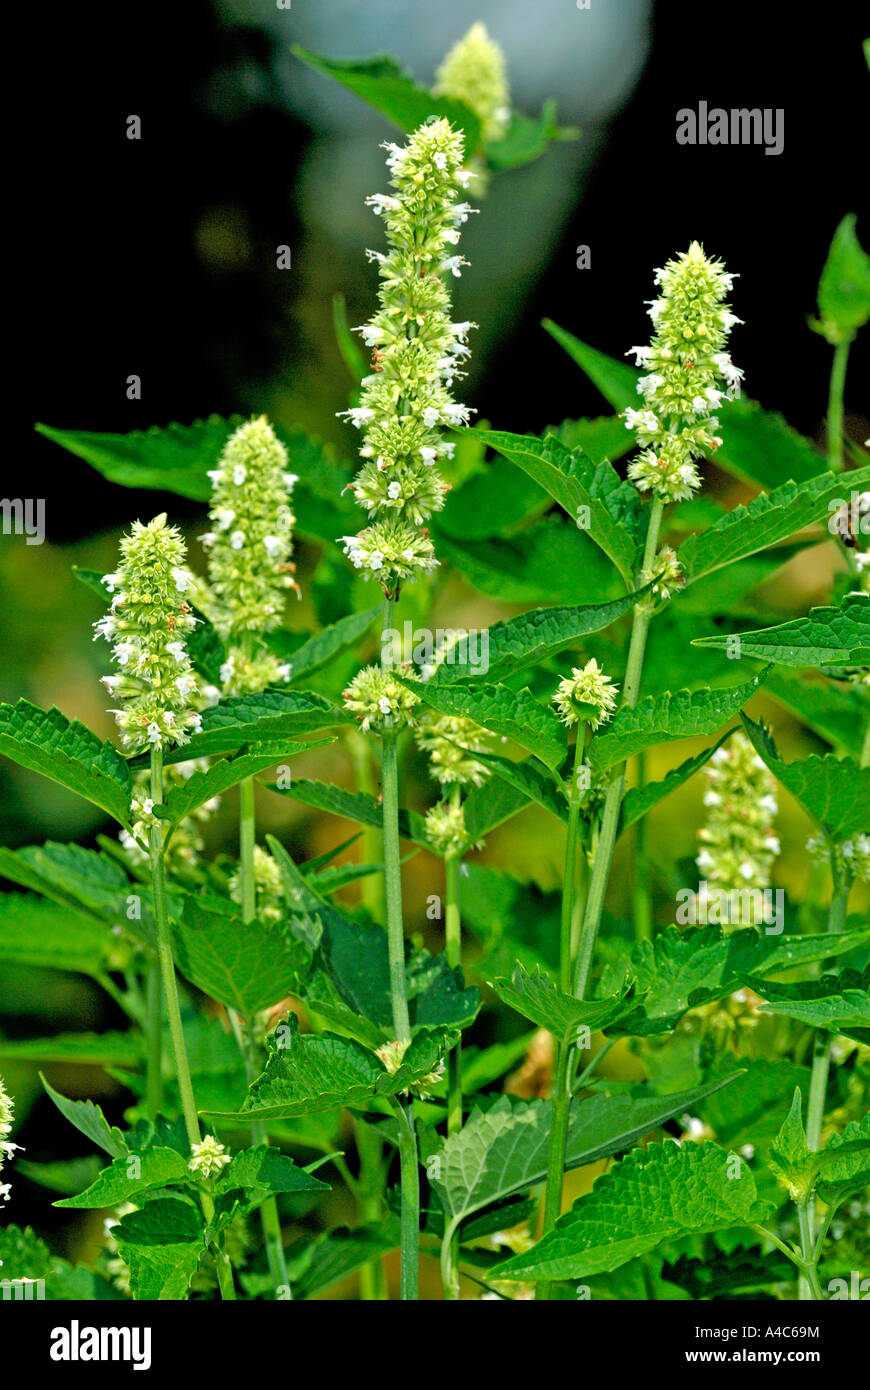 Anise Hyssop (Agastache foeniculum), variety: Alabaster, flowering. Germany August Stock Photo